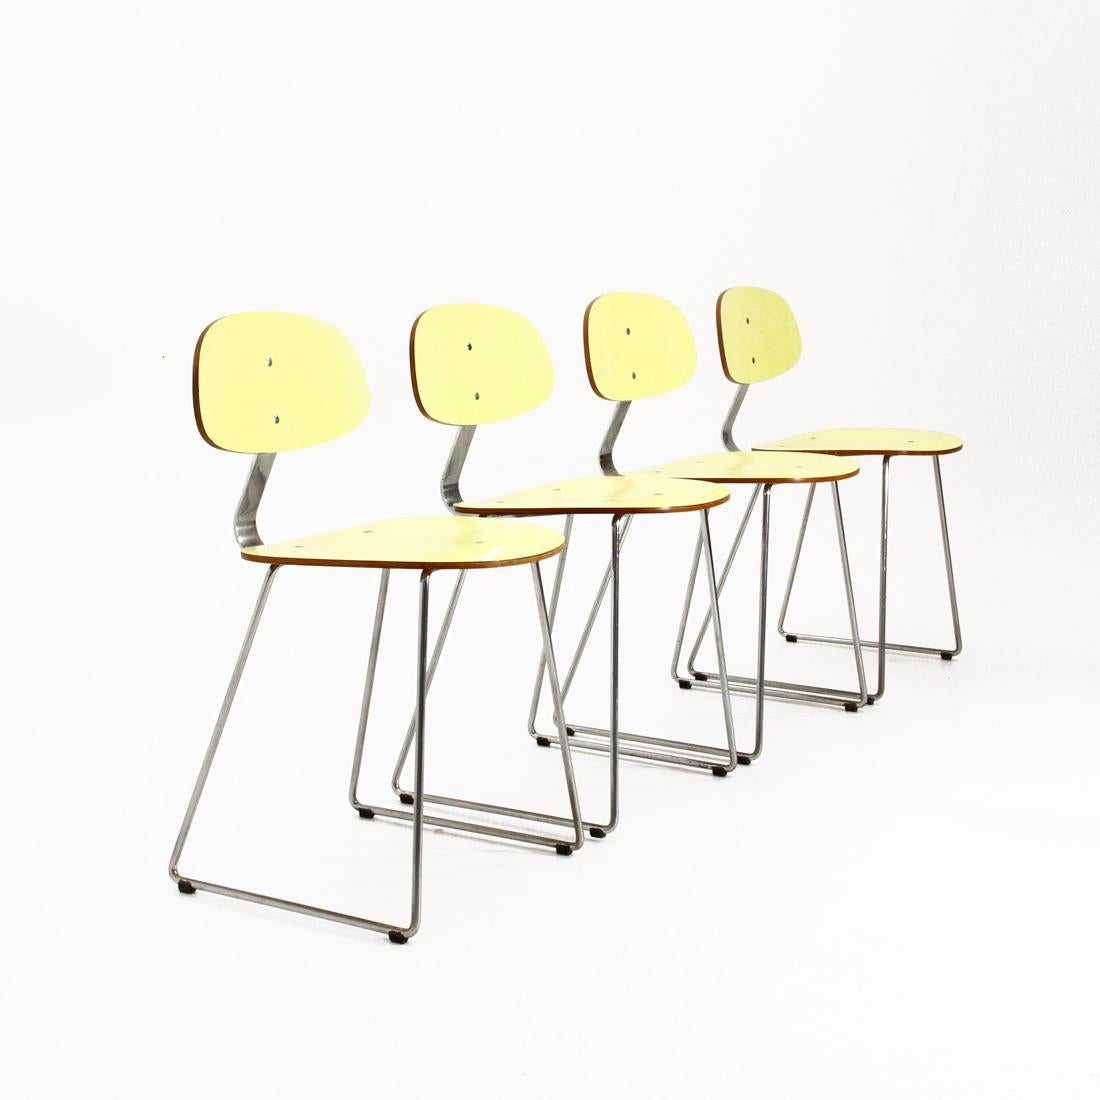 4 chairs produced in the 1950s by 3V Arredamenti designed by Georges Coslin.
Chromed metal structure.
Seat and back in curved formica veneered in yellow formica.
Structure in good condition, lack of chrome, signs of rust and some signs of normal